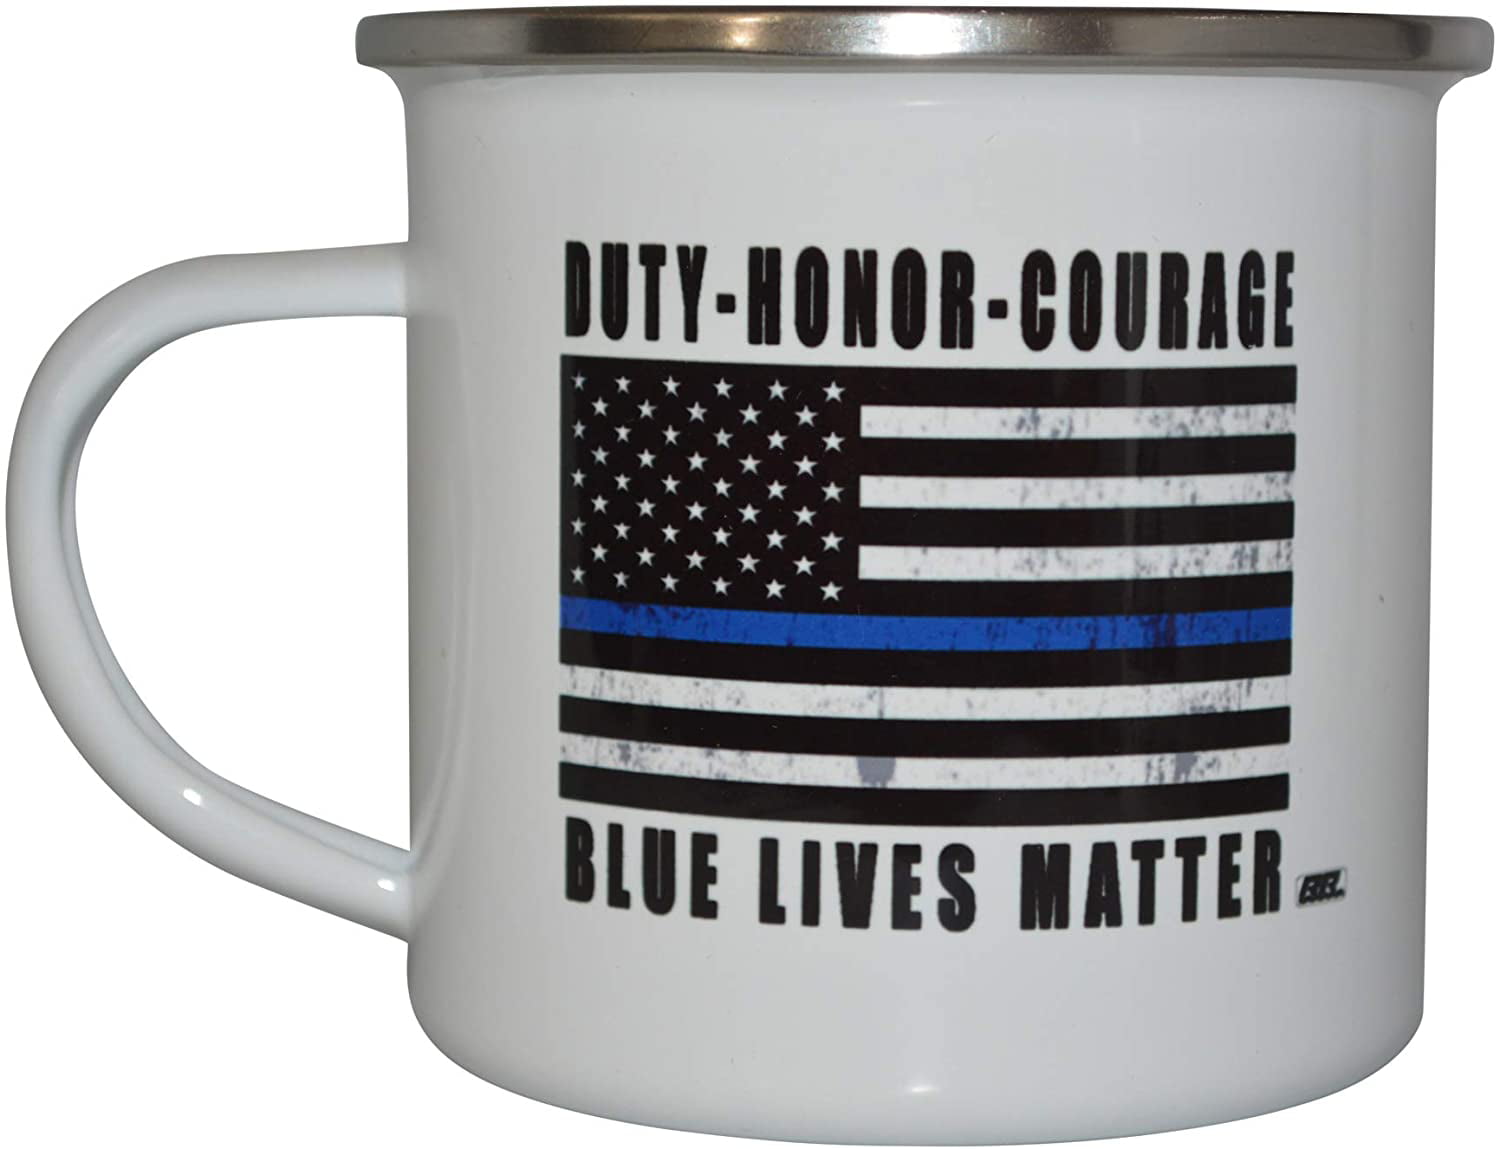 The Thin Blue Line Flag Camp Mug Enamel Camping Coffee Cup Gift Police  Officers Law Enforcement - Walmart.com